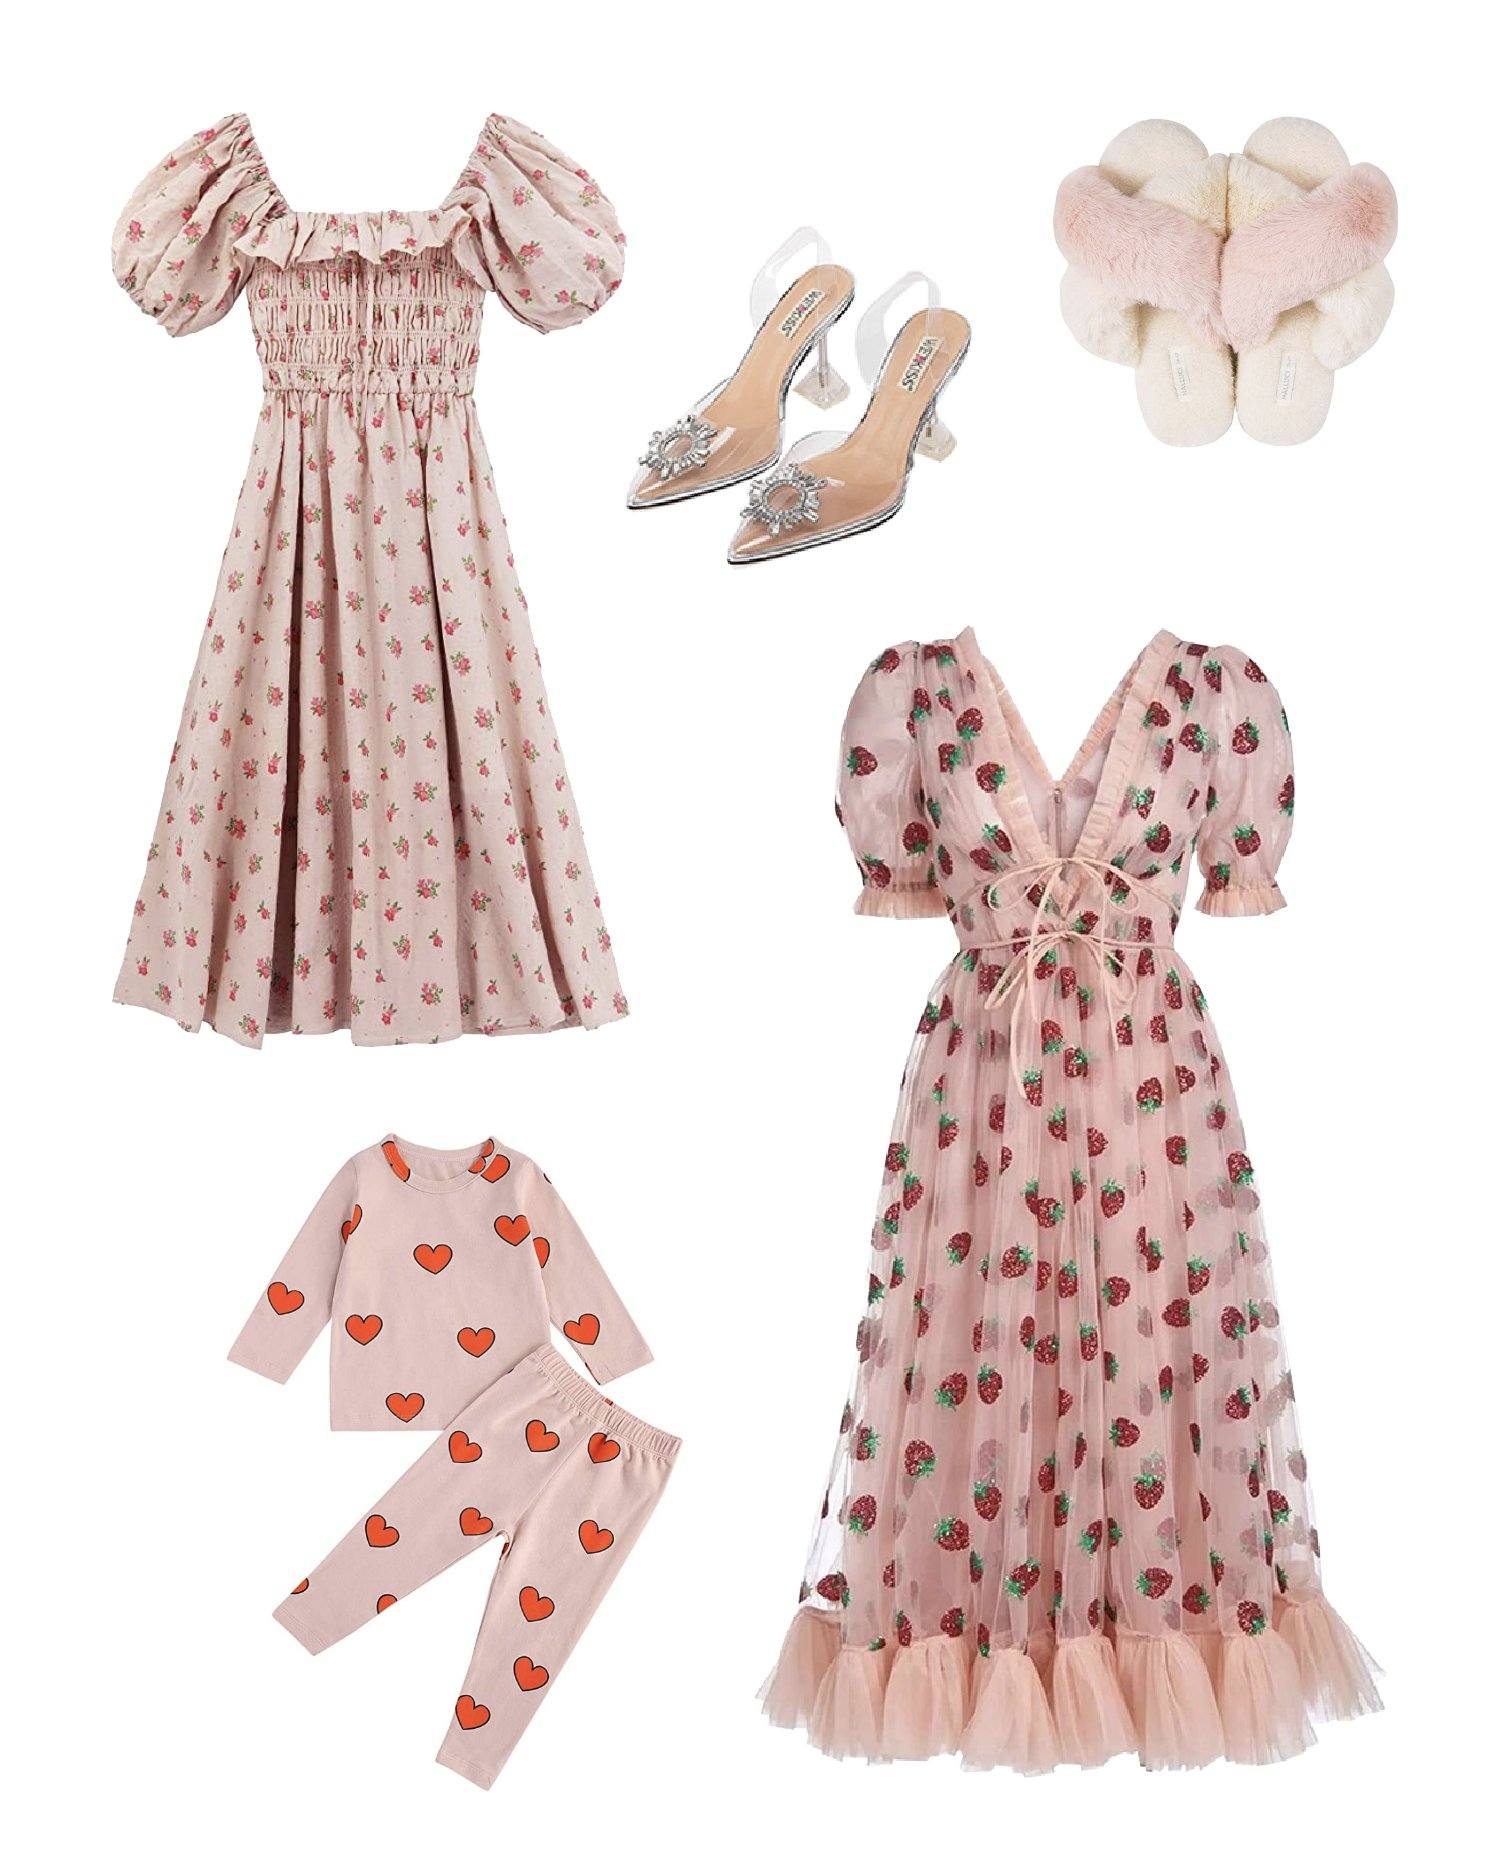 A Special At-Home Valentine’s: My Picks for Loungewear, PJs, and Dresses